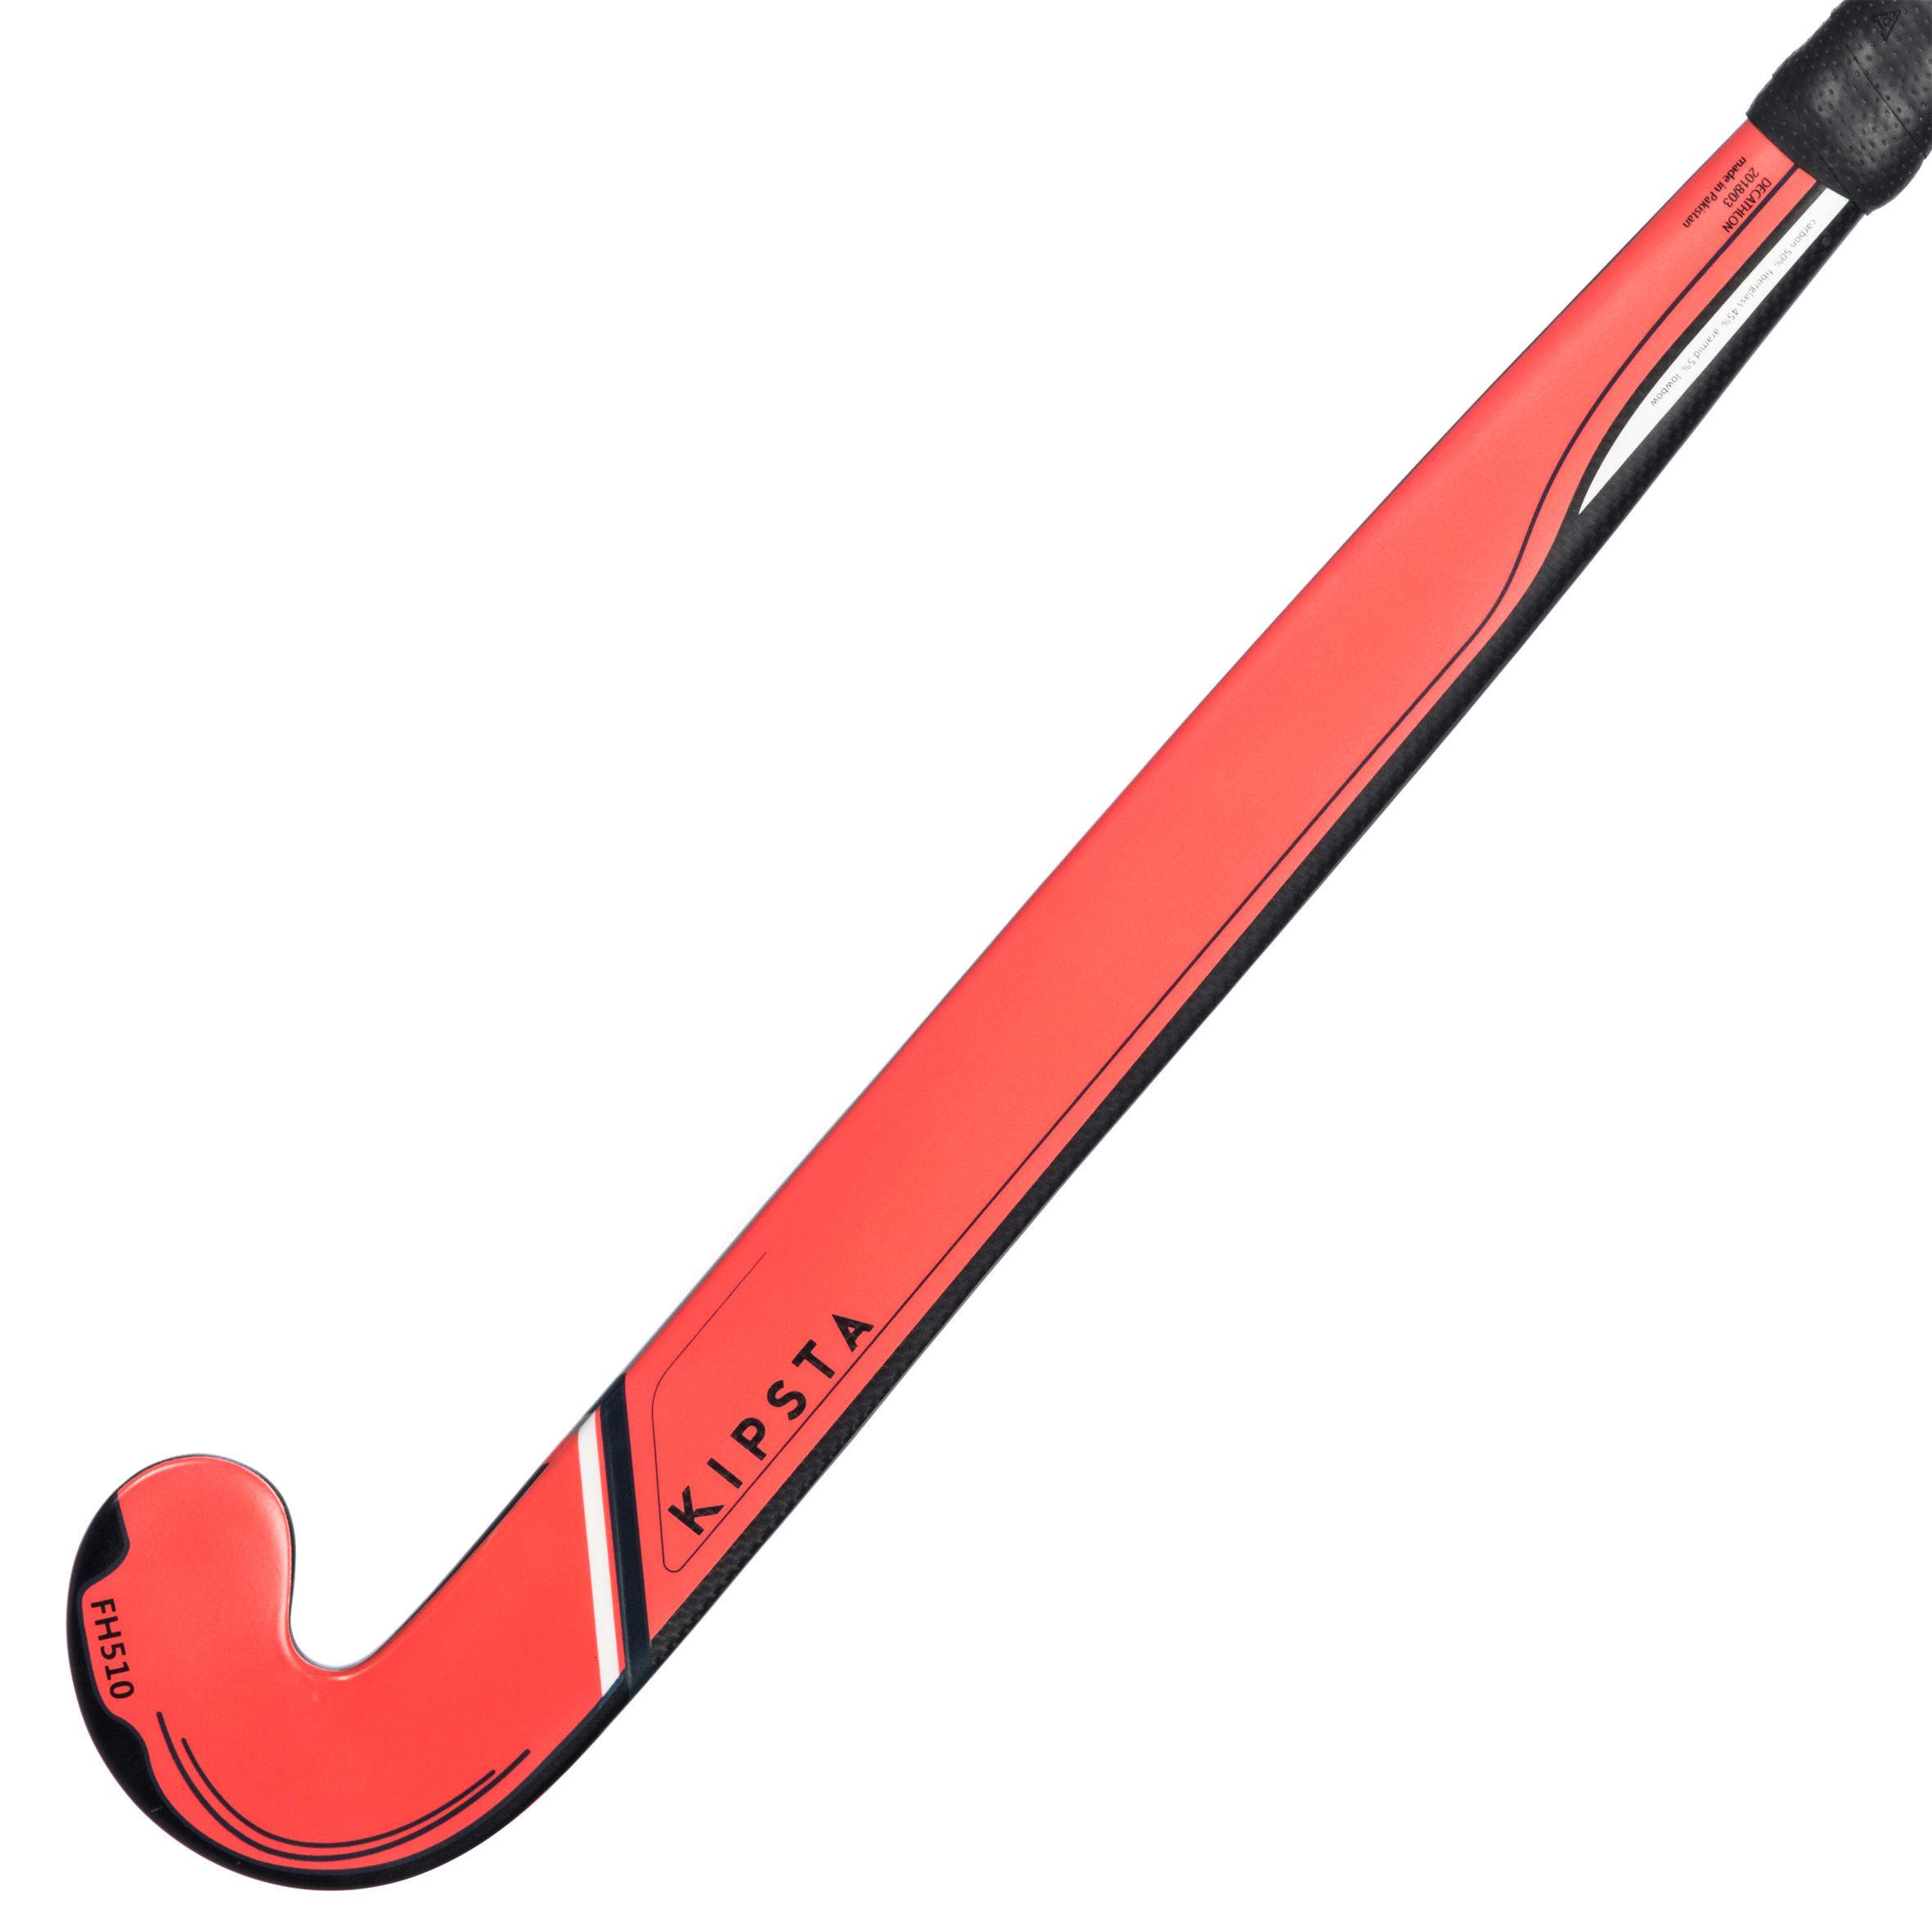 FH510 Adult Intermediate Field Hockey 50% Carbon Low Bow Stick - Coral 3/12